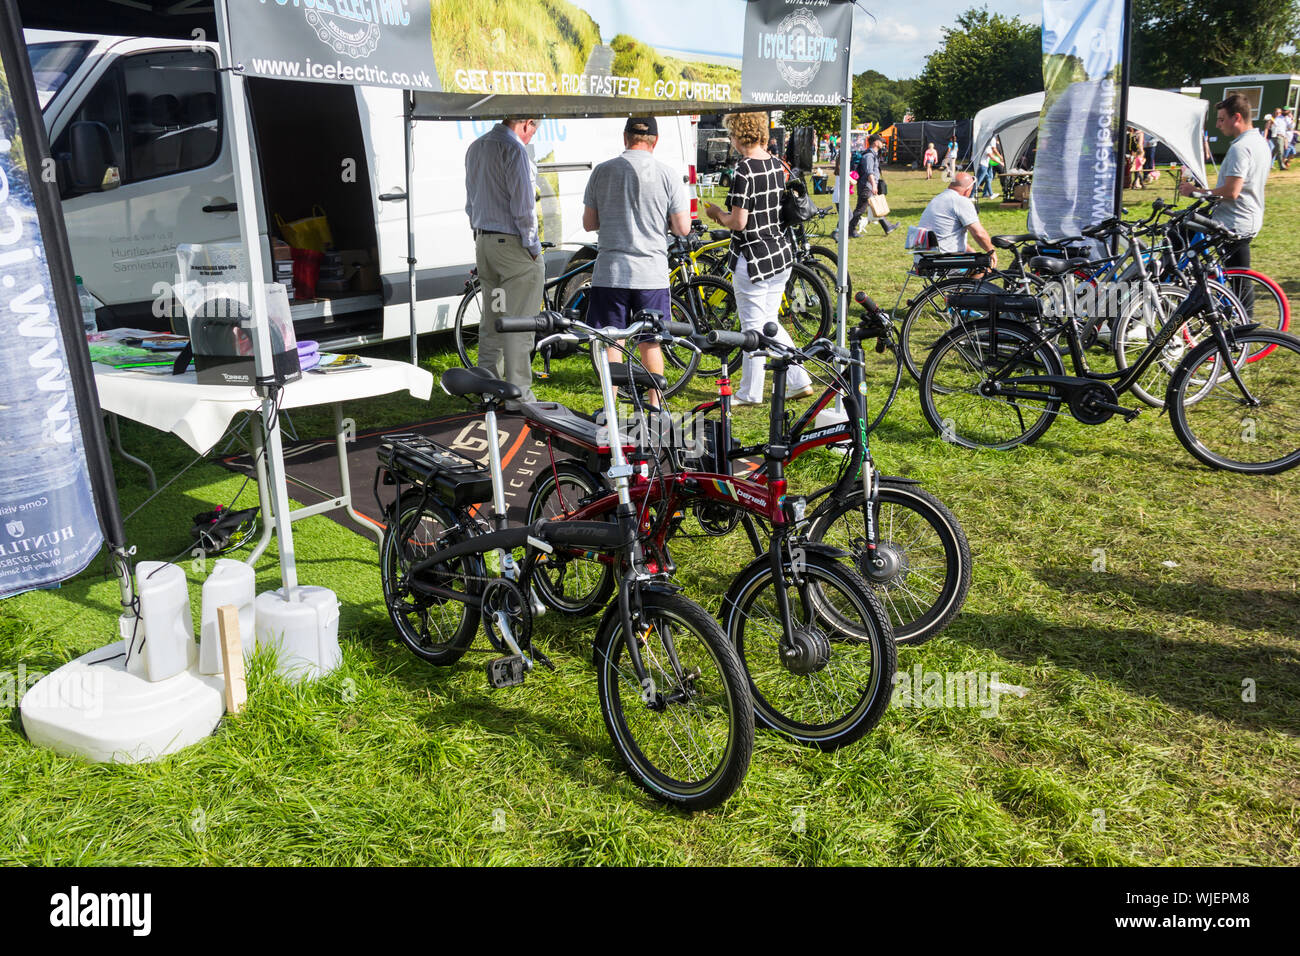 Forme and Benelli branded electric bikes on display on the Lancashire Show trade stand of 'I Cycle Electric', a specialist retailer of electric bikes. Stock Photo